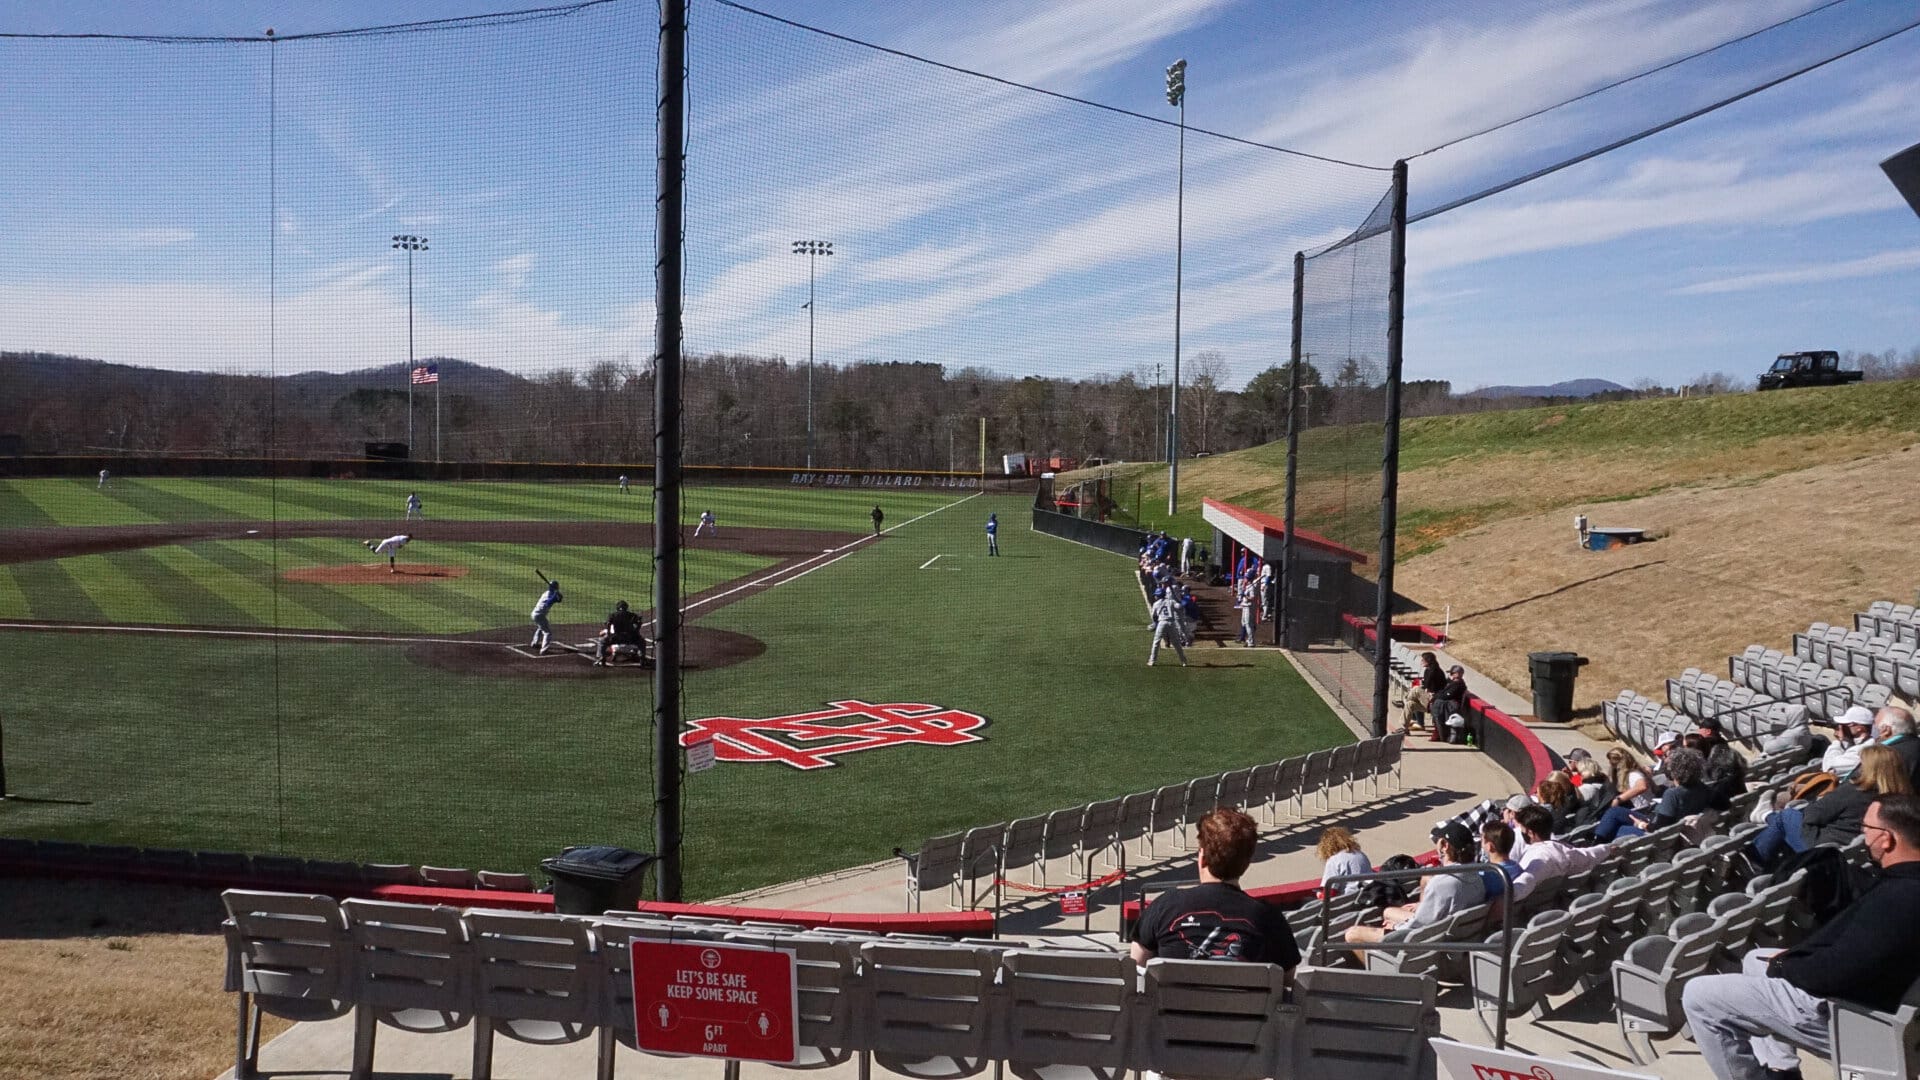 Spring is coming and North Greenville baseball is in full swing.